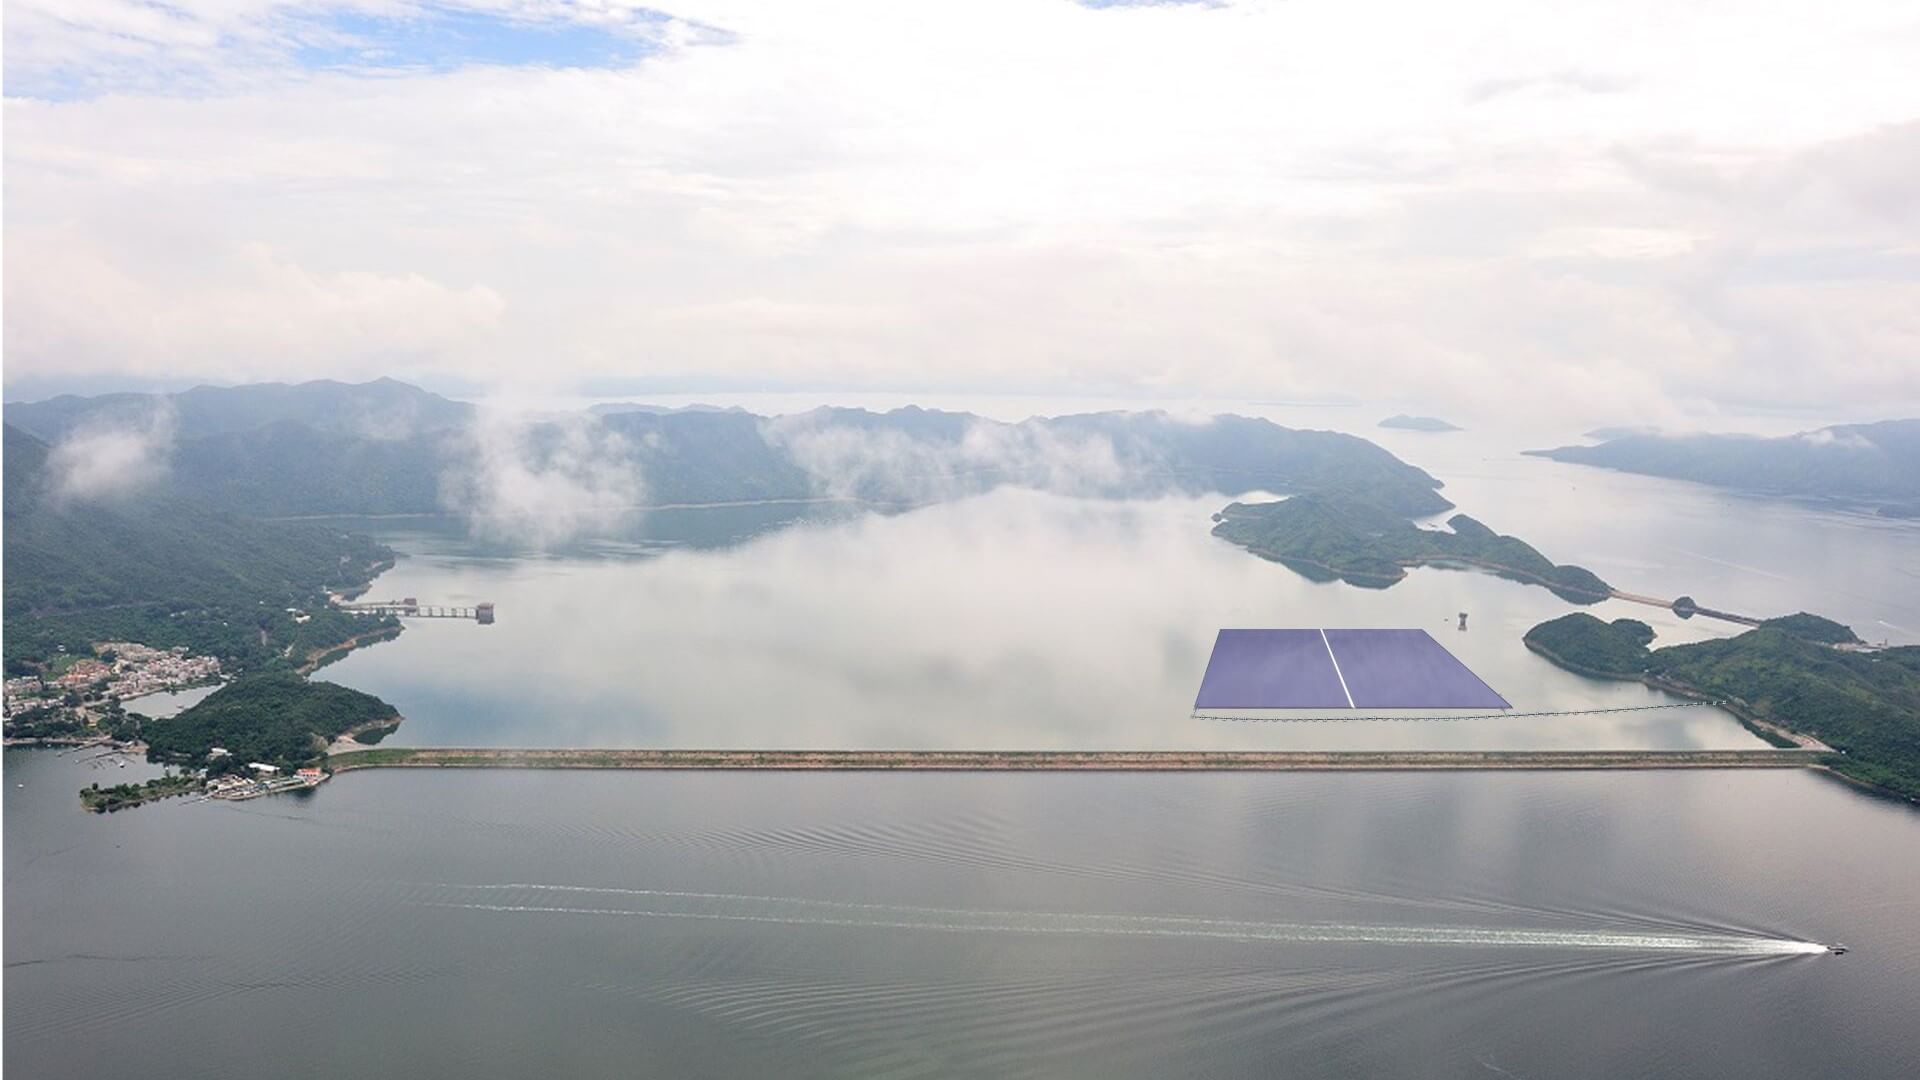 Artist’s impression of floating solar project at Plover Cove reservoir, Hong Kong